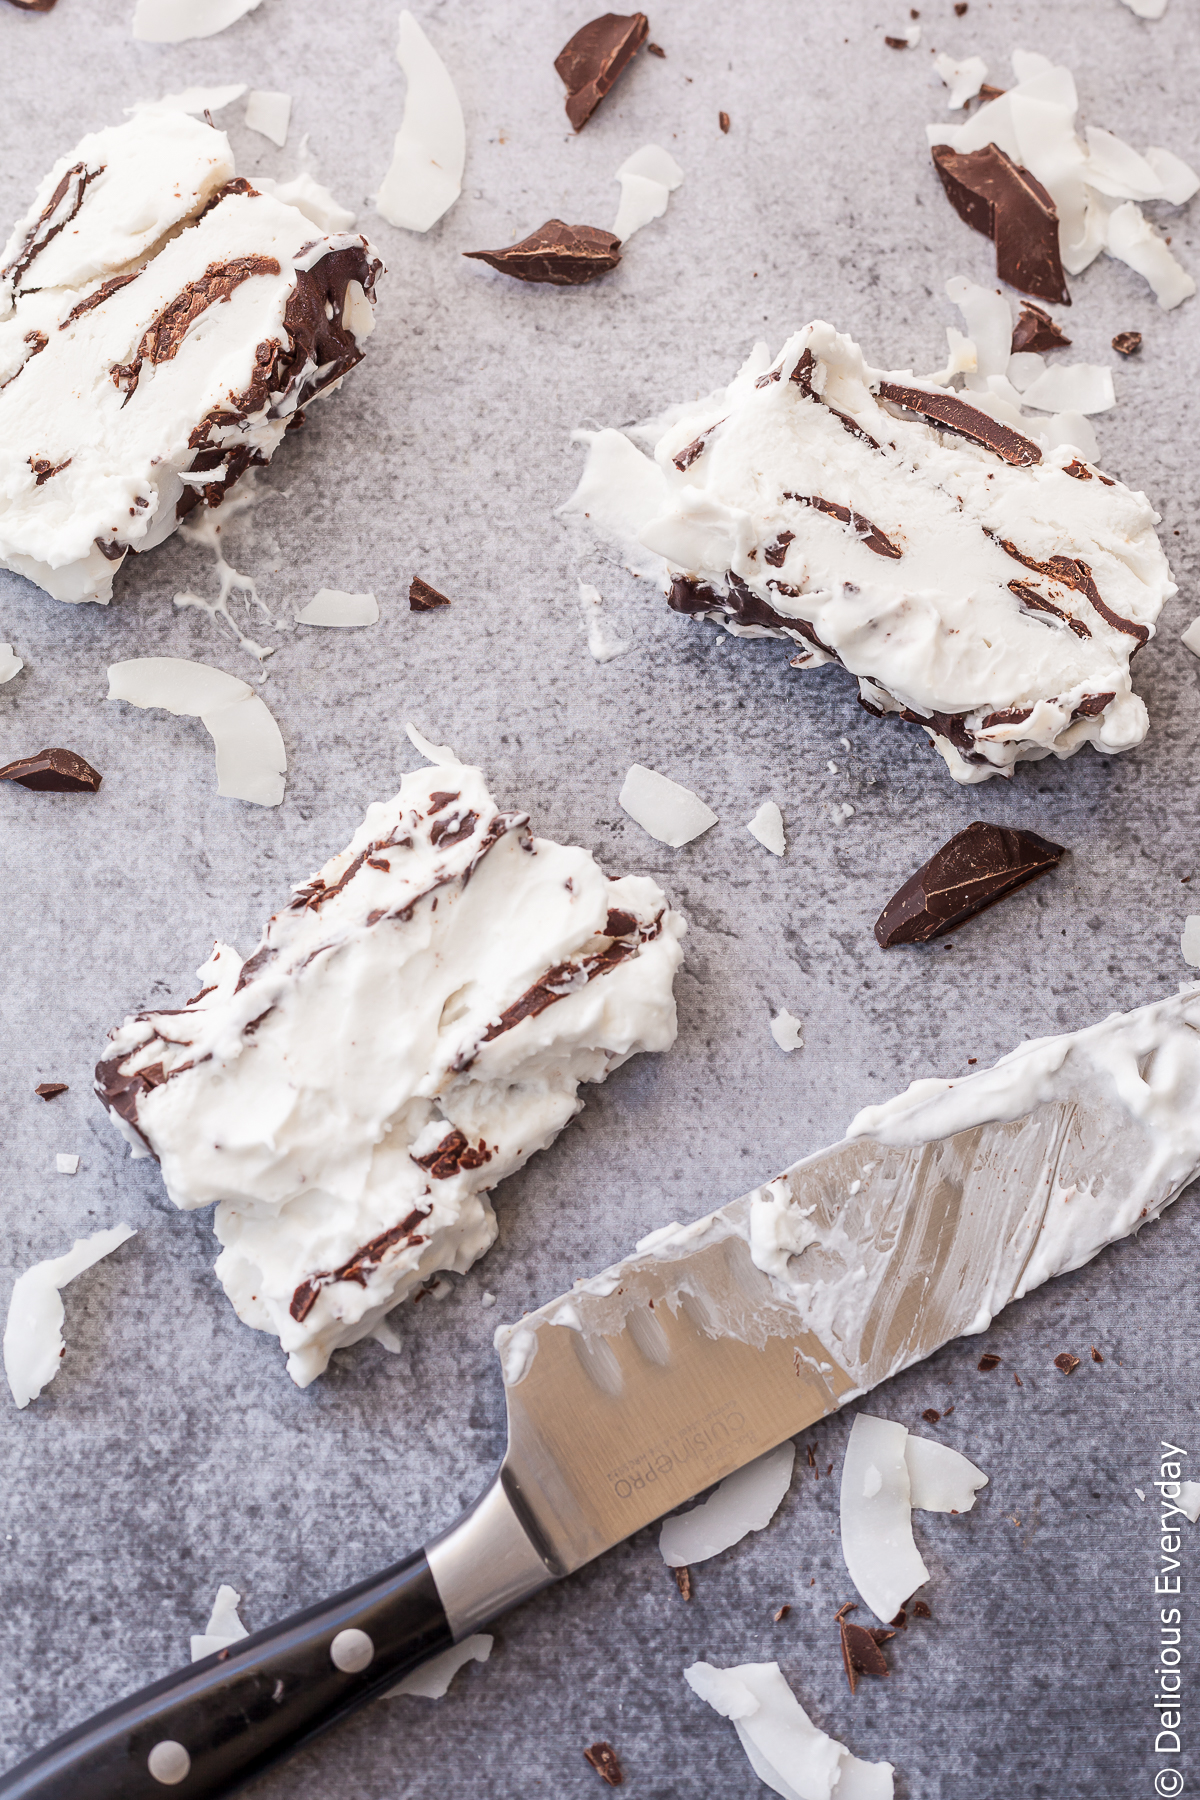 This Bounty Vienetta Ice Cream is the love child of Bounty Bars and Vienetta Ice Cream. This no churn vegan and dairy free recipe is super easy and sure to impress your dinner party guests.